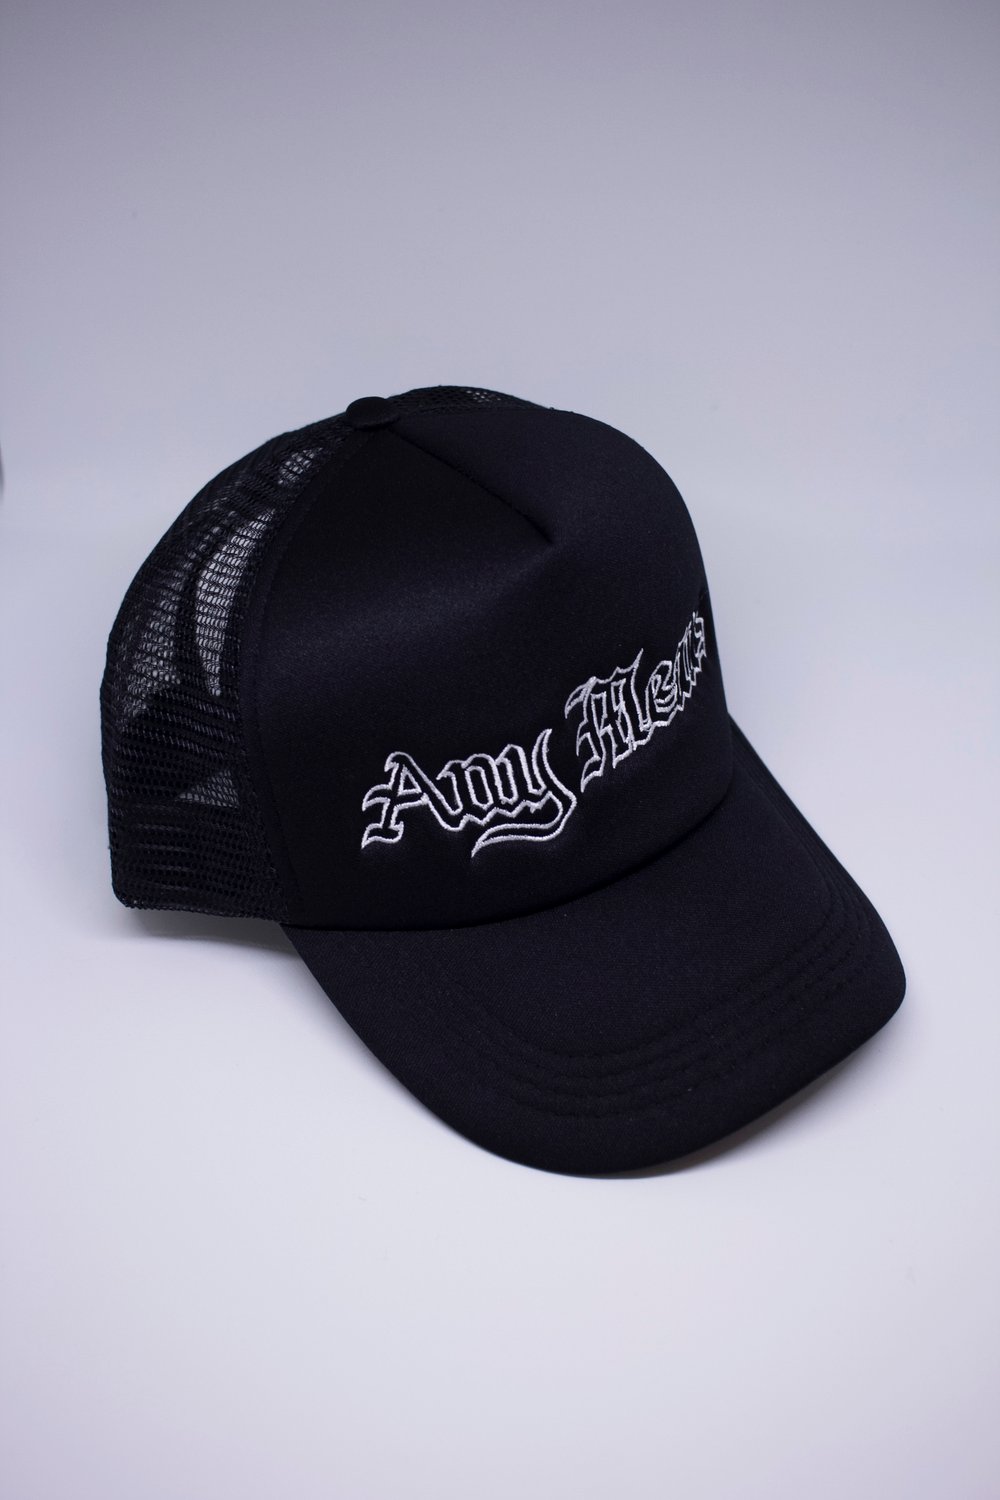 Gothic Trucker Cap | Any Means